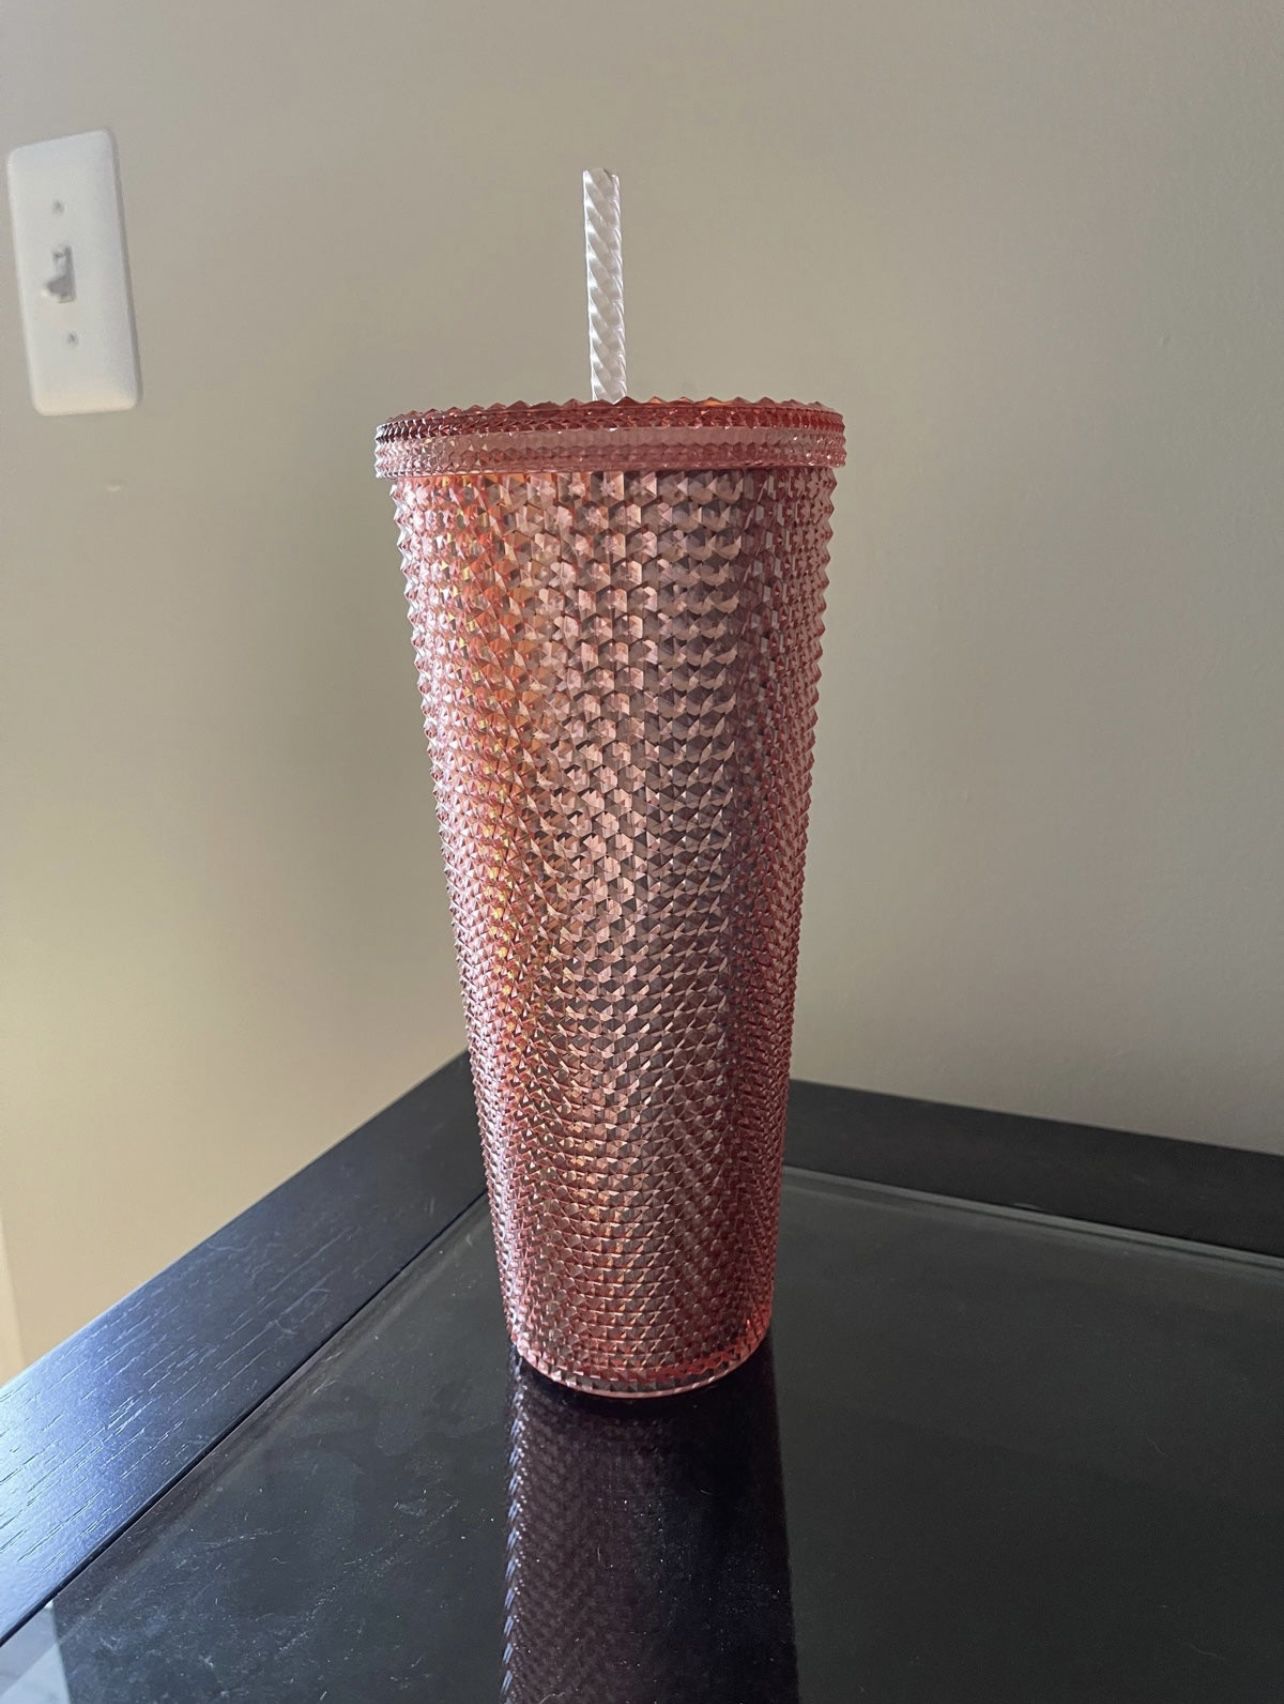 Brand New Rose Gold Pink Starbucks Cup for Sale in Sterling